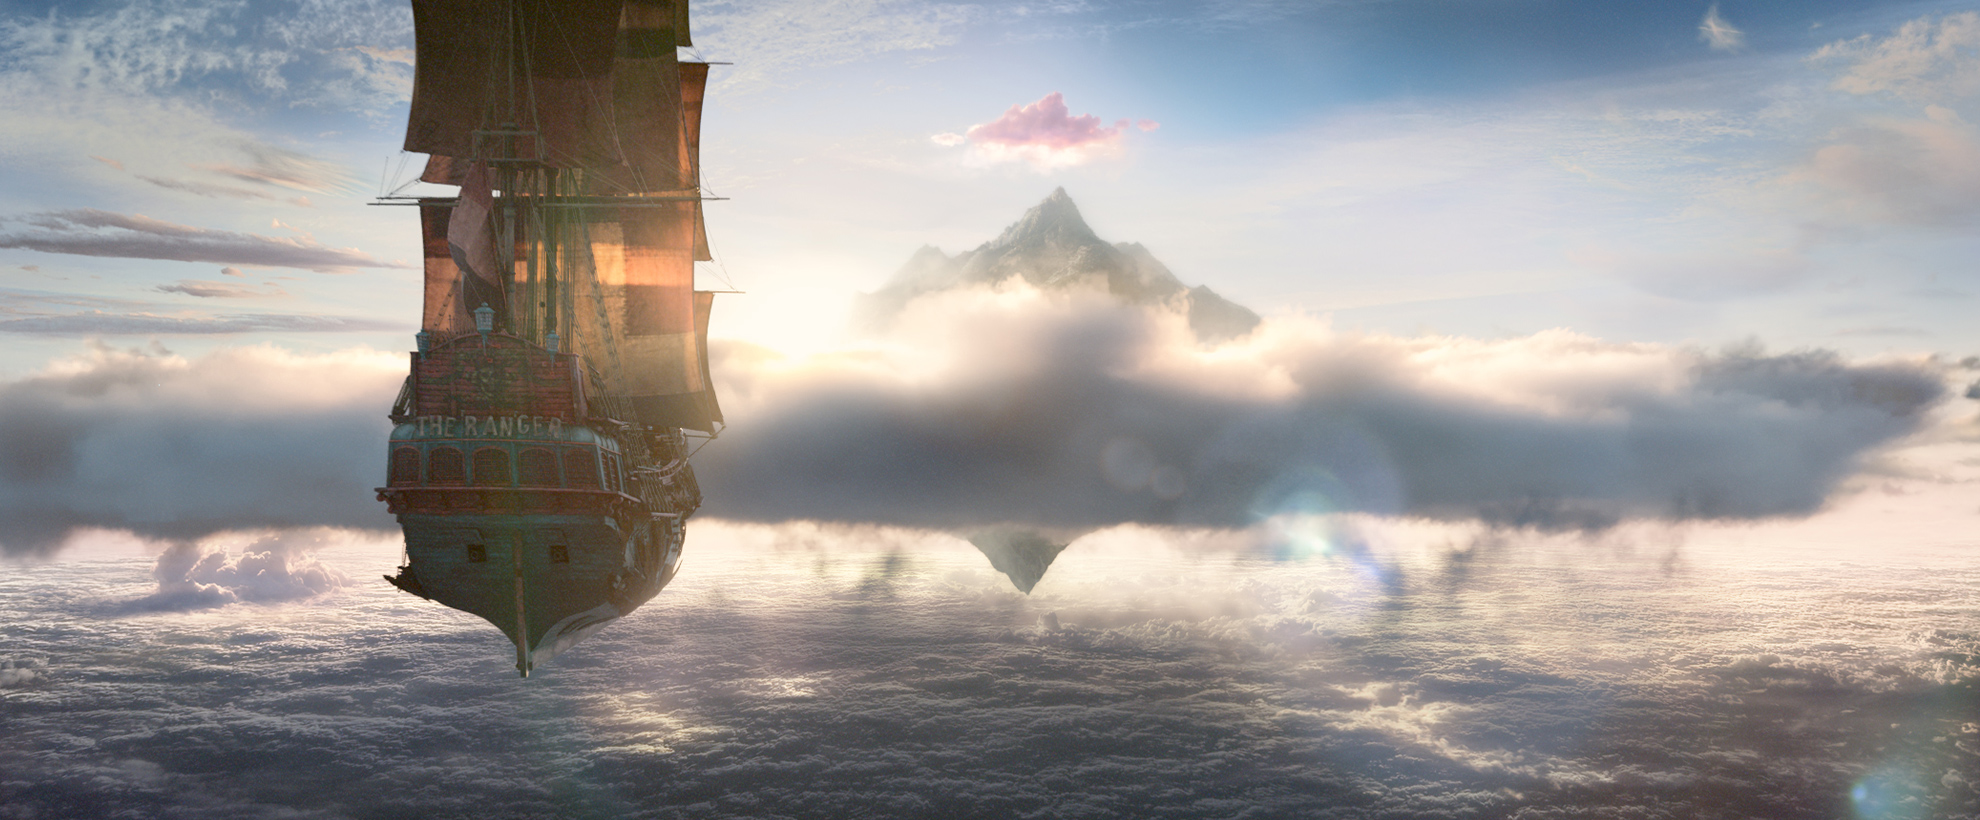 The jolly roger flies above the clouds against a blue sky, the sails lit up by the sun